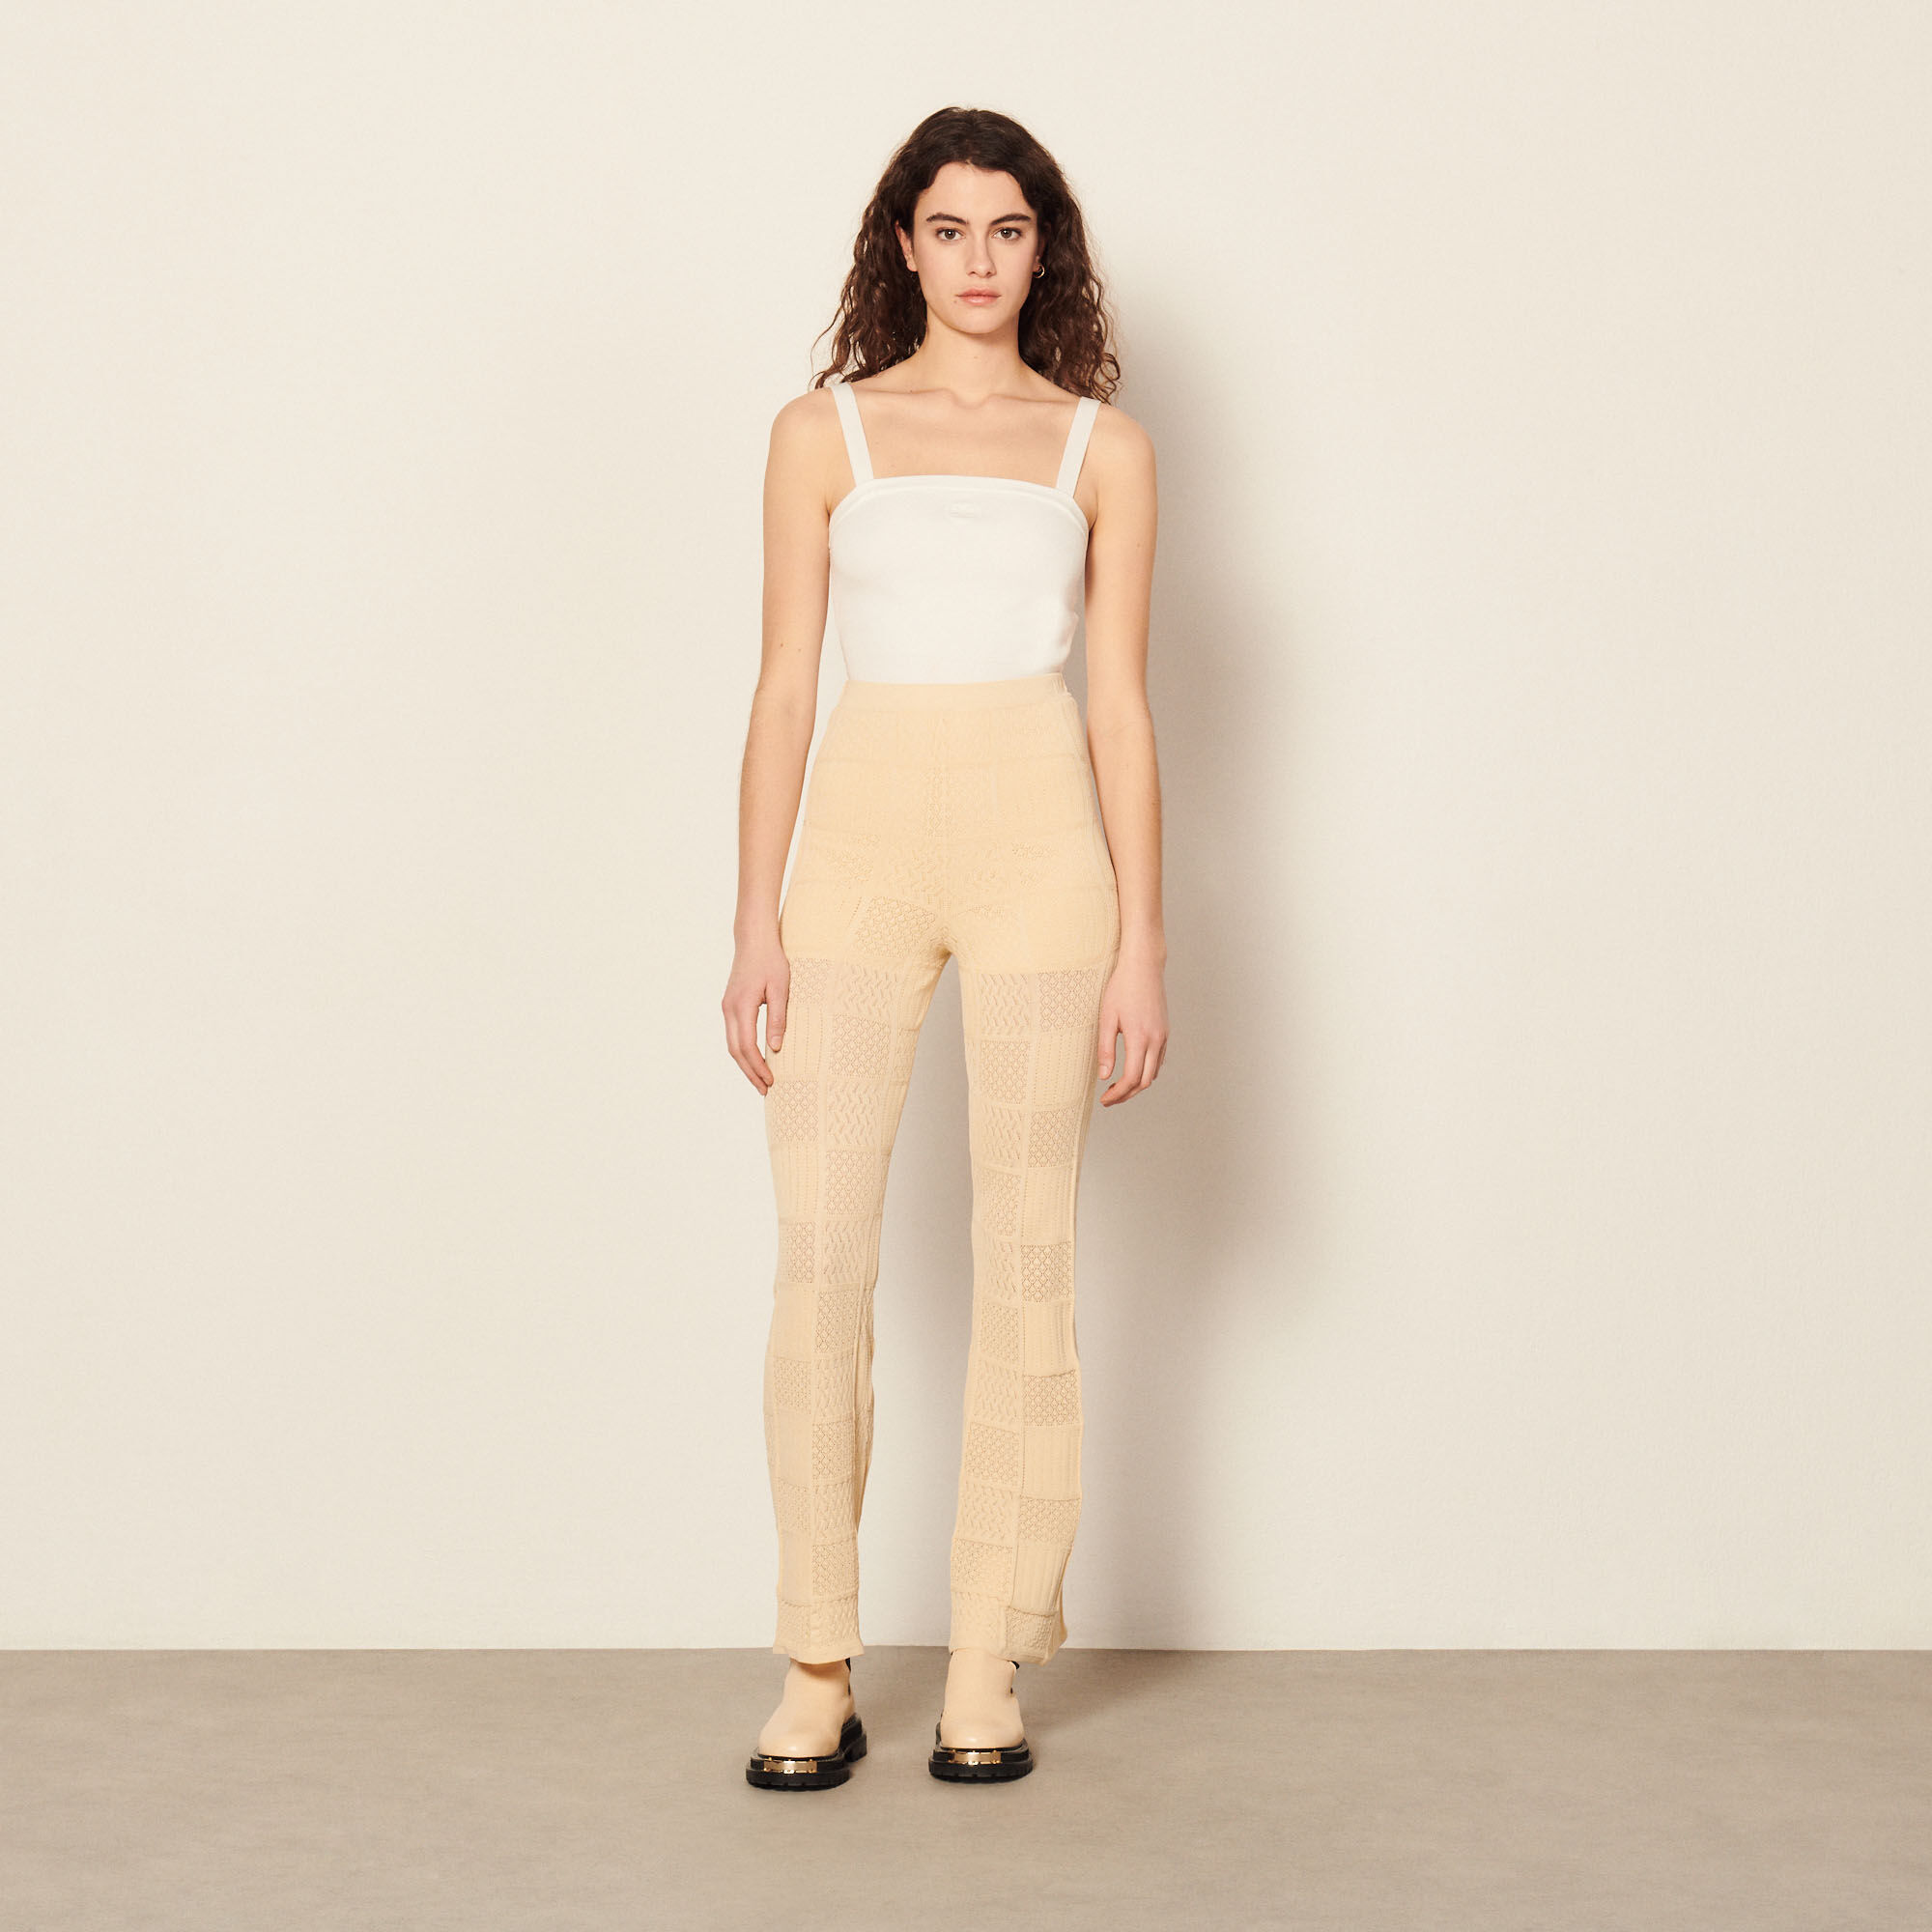 Pointelle knit trousers